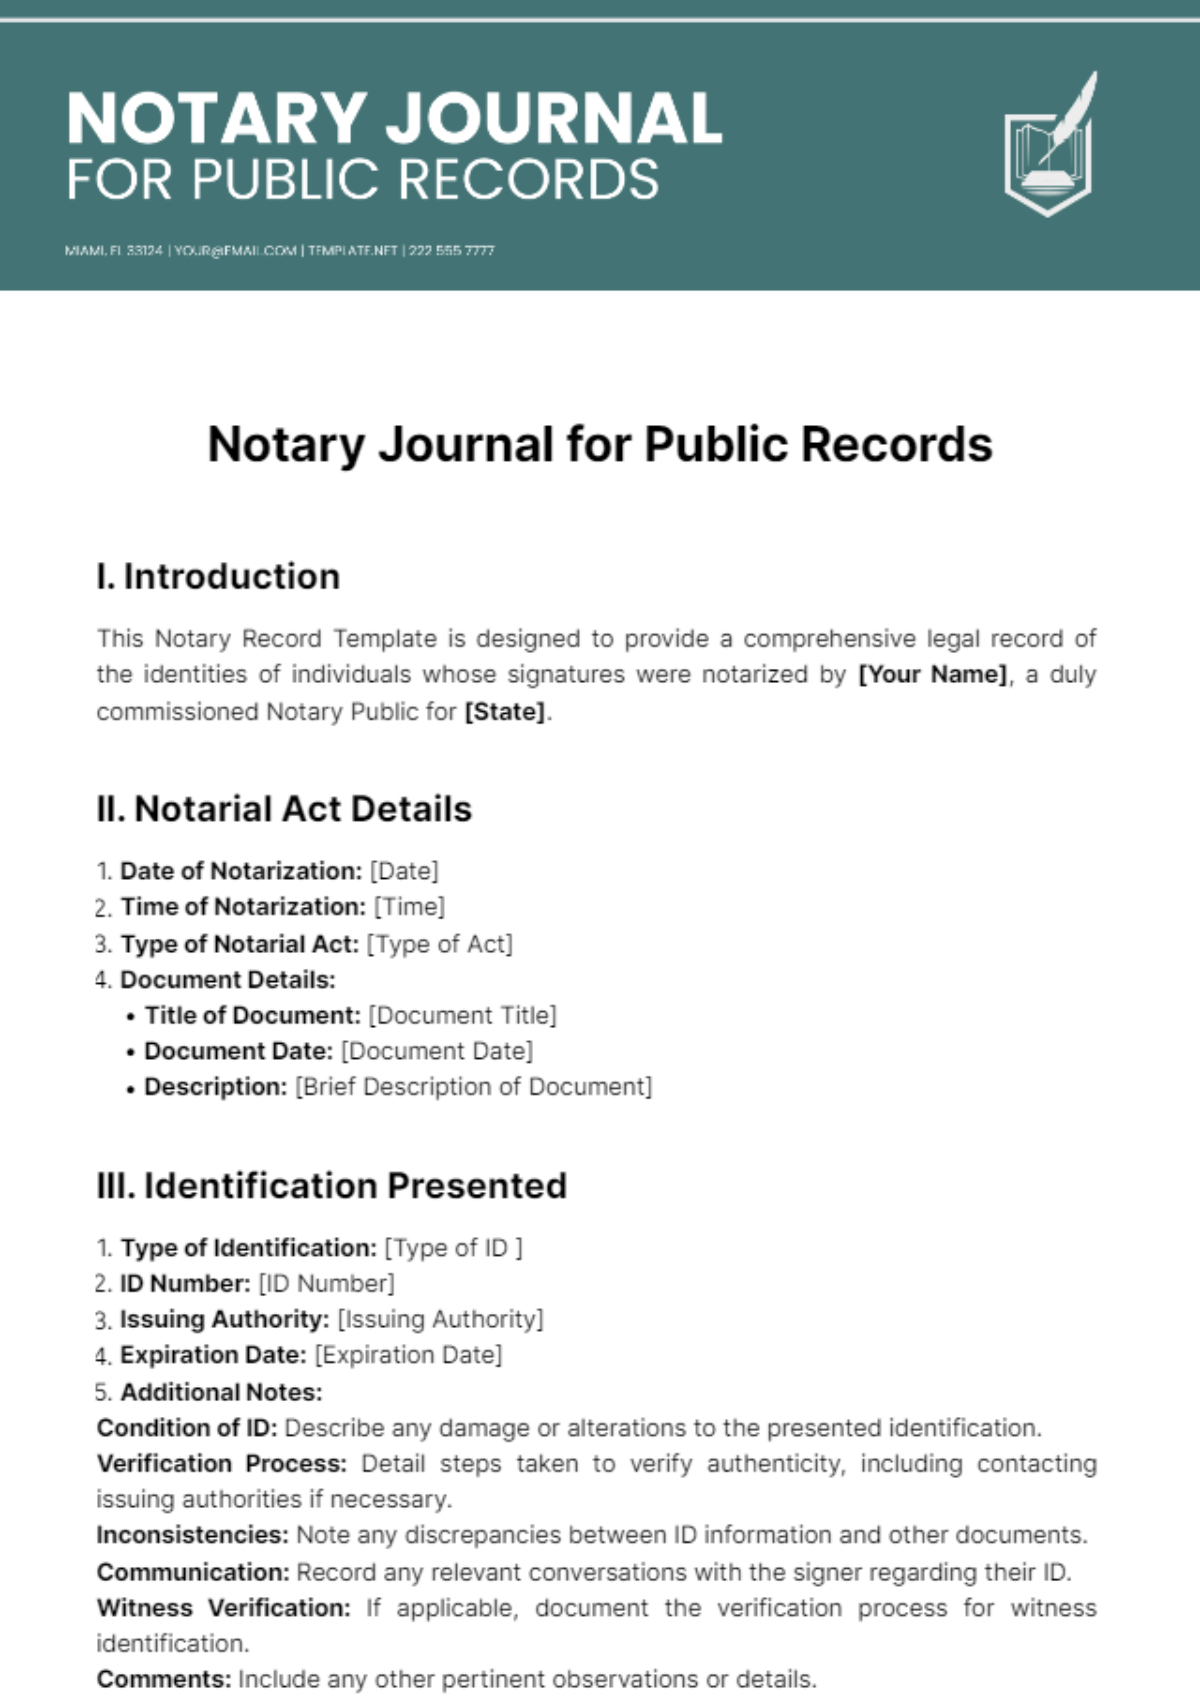 Free Notary Journal for Public Records Template